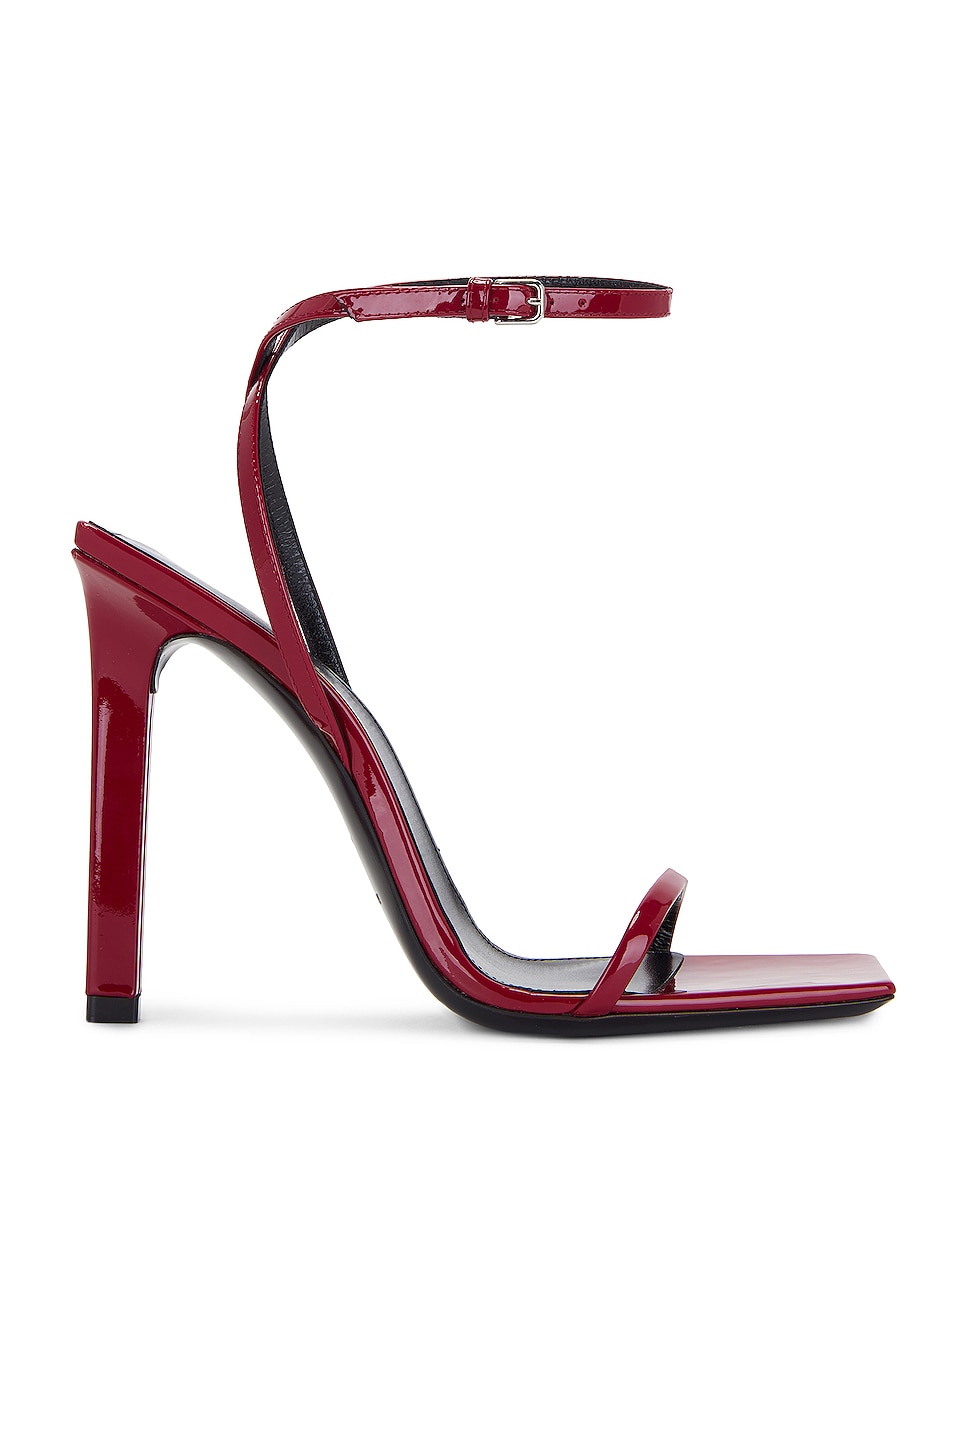 Image 1 of Saint Laurent Pam Sandal in Opyum Red